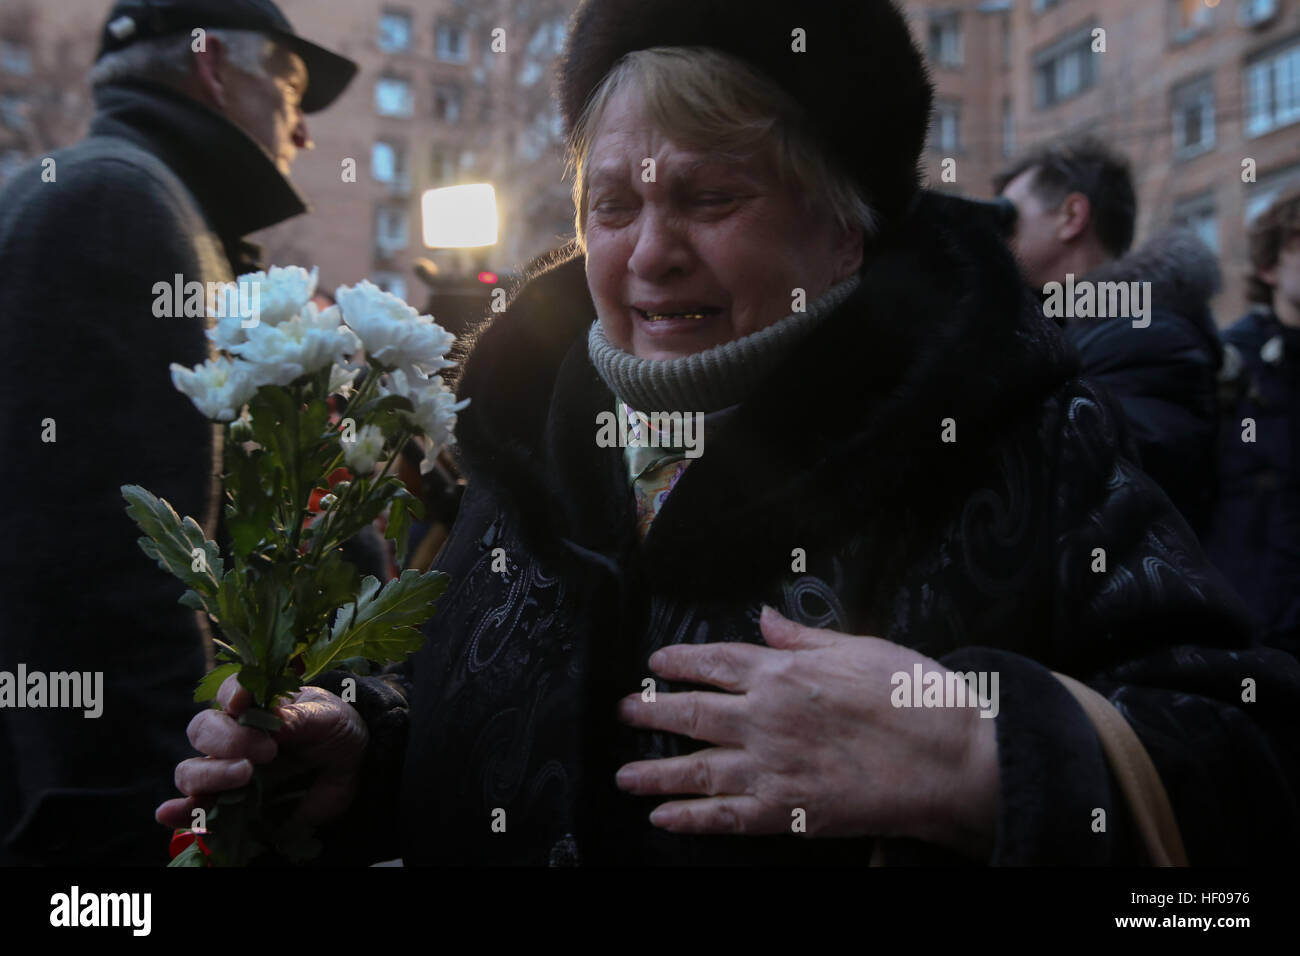 Moscow, Russia. 25th December, 2016. Crying people near Alexandrov Hall, a rehearsal room of the Alexandrov Ensemble, as they pay tribute to the victims of a Russian Defense Ministry plane crash. A Tupolev Tu-154 plane of the Russian Defense Ministry with 92 people on board crashed into the Black Sea near the city of Sochi on December 25, 2016. The plane was carrying members of the Alexandrov Ensemble, Russian servicemen and journalists to Russia's Hmeymim air base in Syria. Fragments of the plane were found about 1.5km from Sochi coastline. © Victor Vytolskiy/Alamy Live News Stock Photo